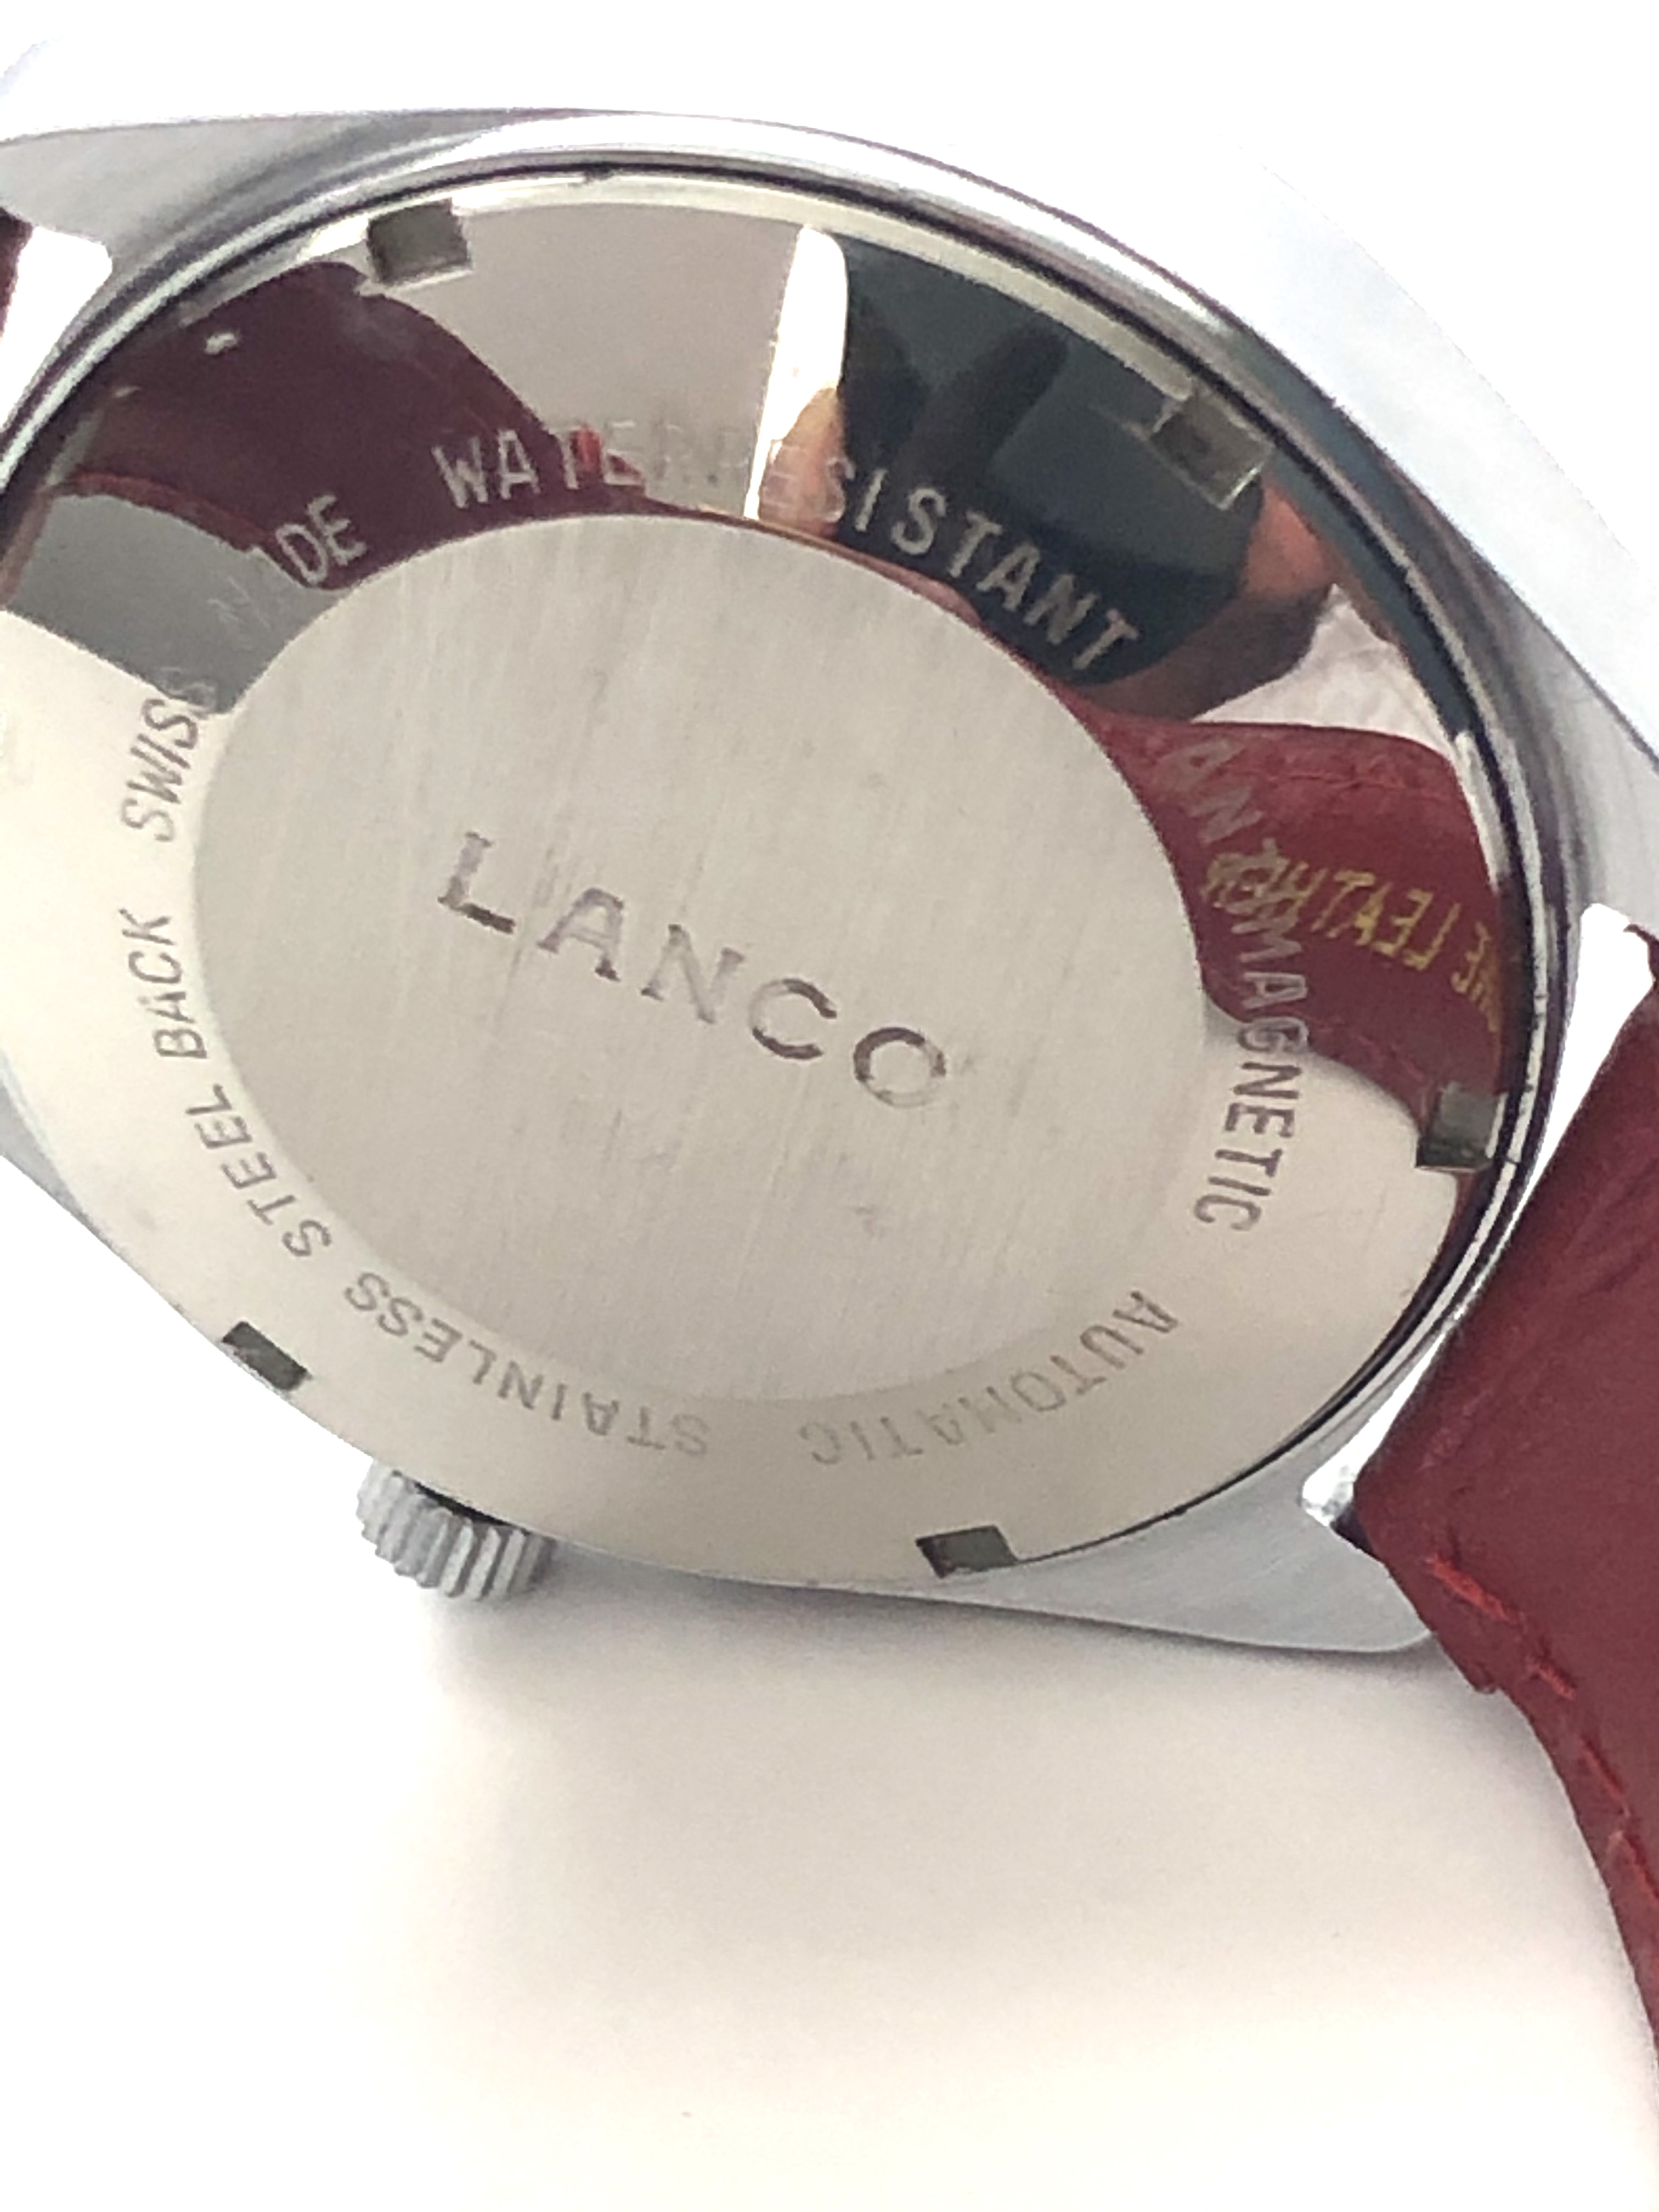 Amazing & Rare Vintage Lanco Swiss Watch - Like new condition collectors dream - Image 13 of 20